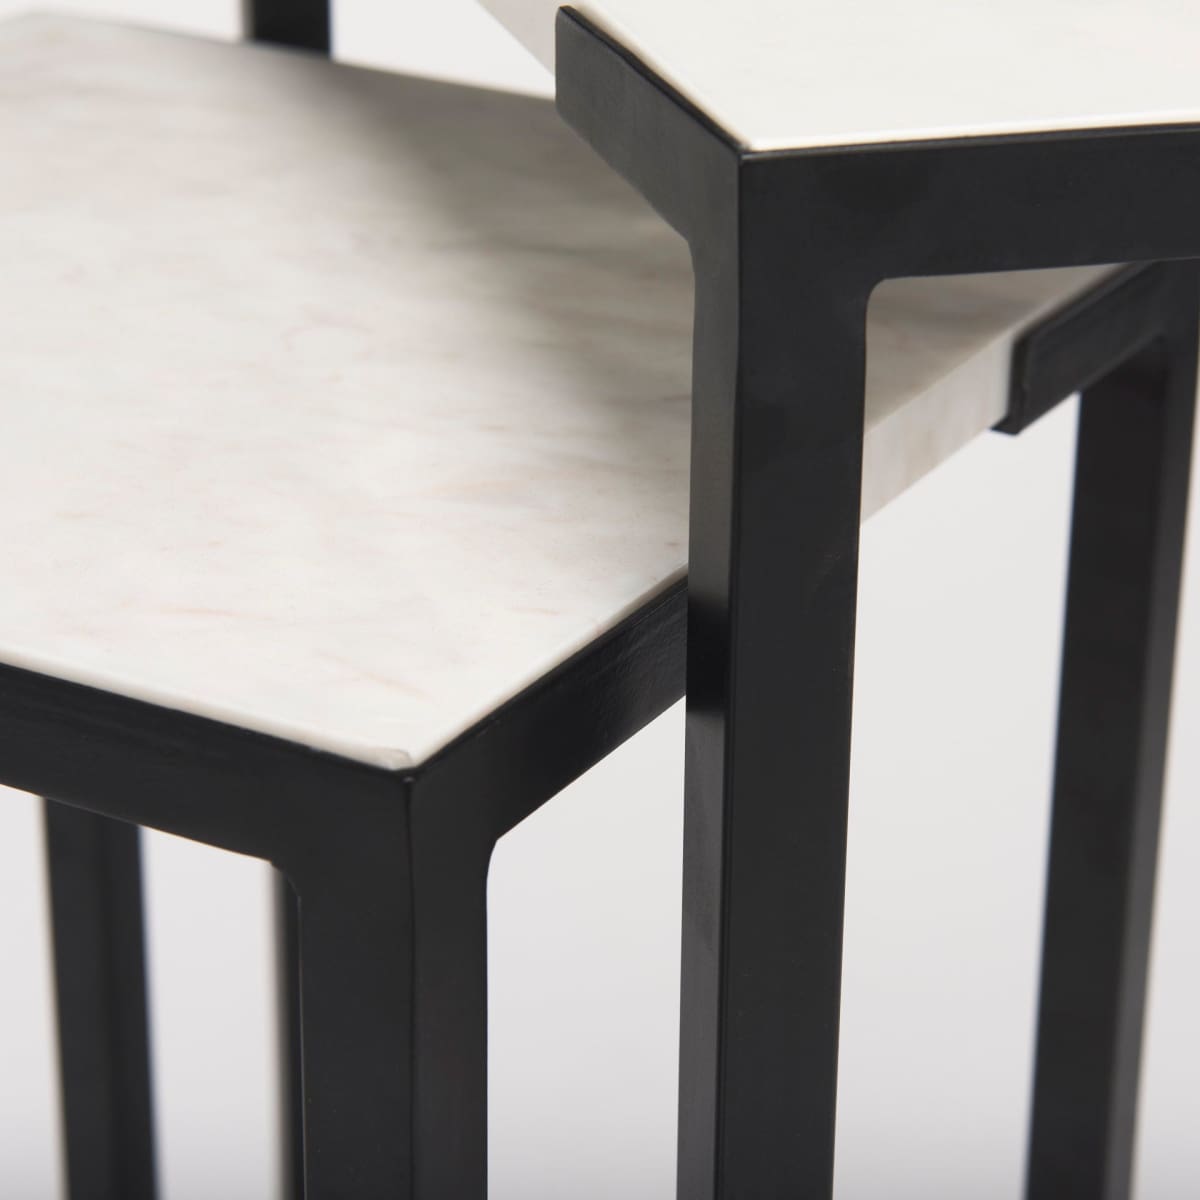 Lucas Accent Table White Marble | Black Iron - accent-tables